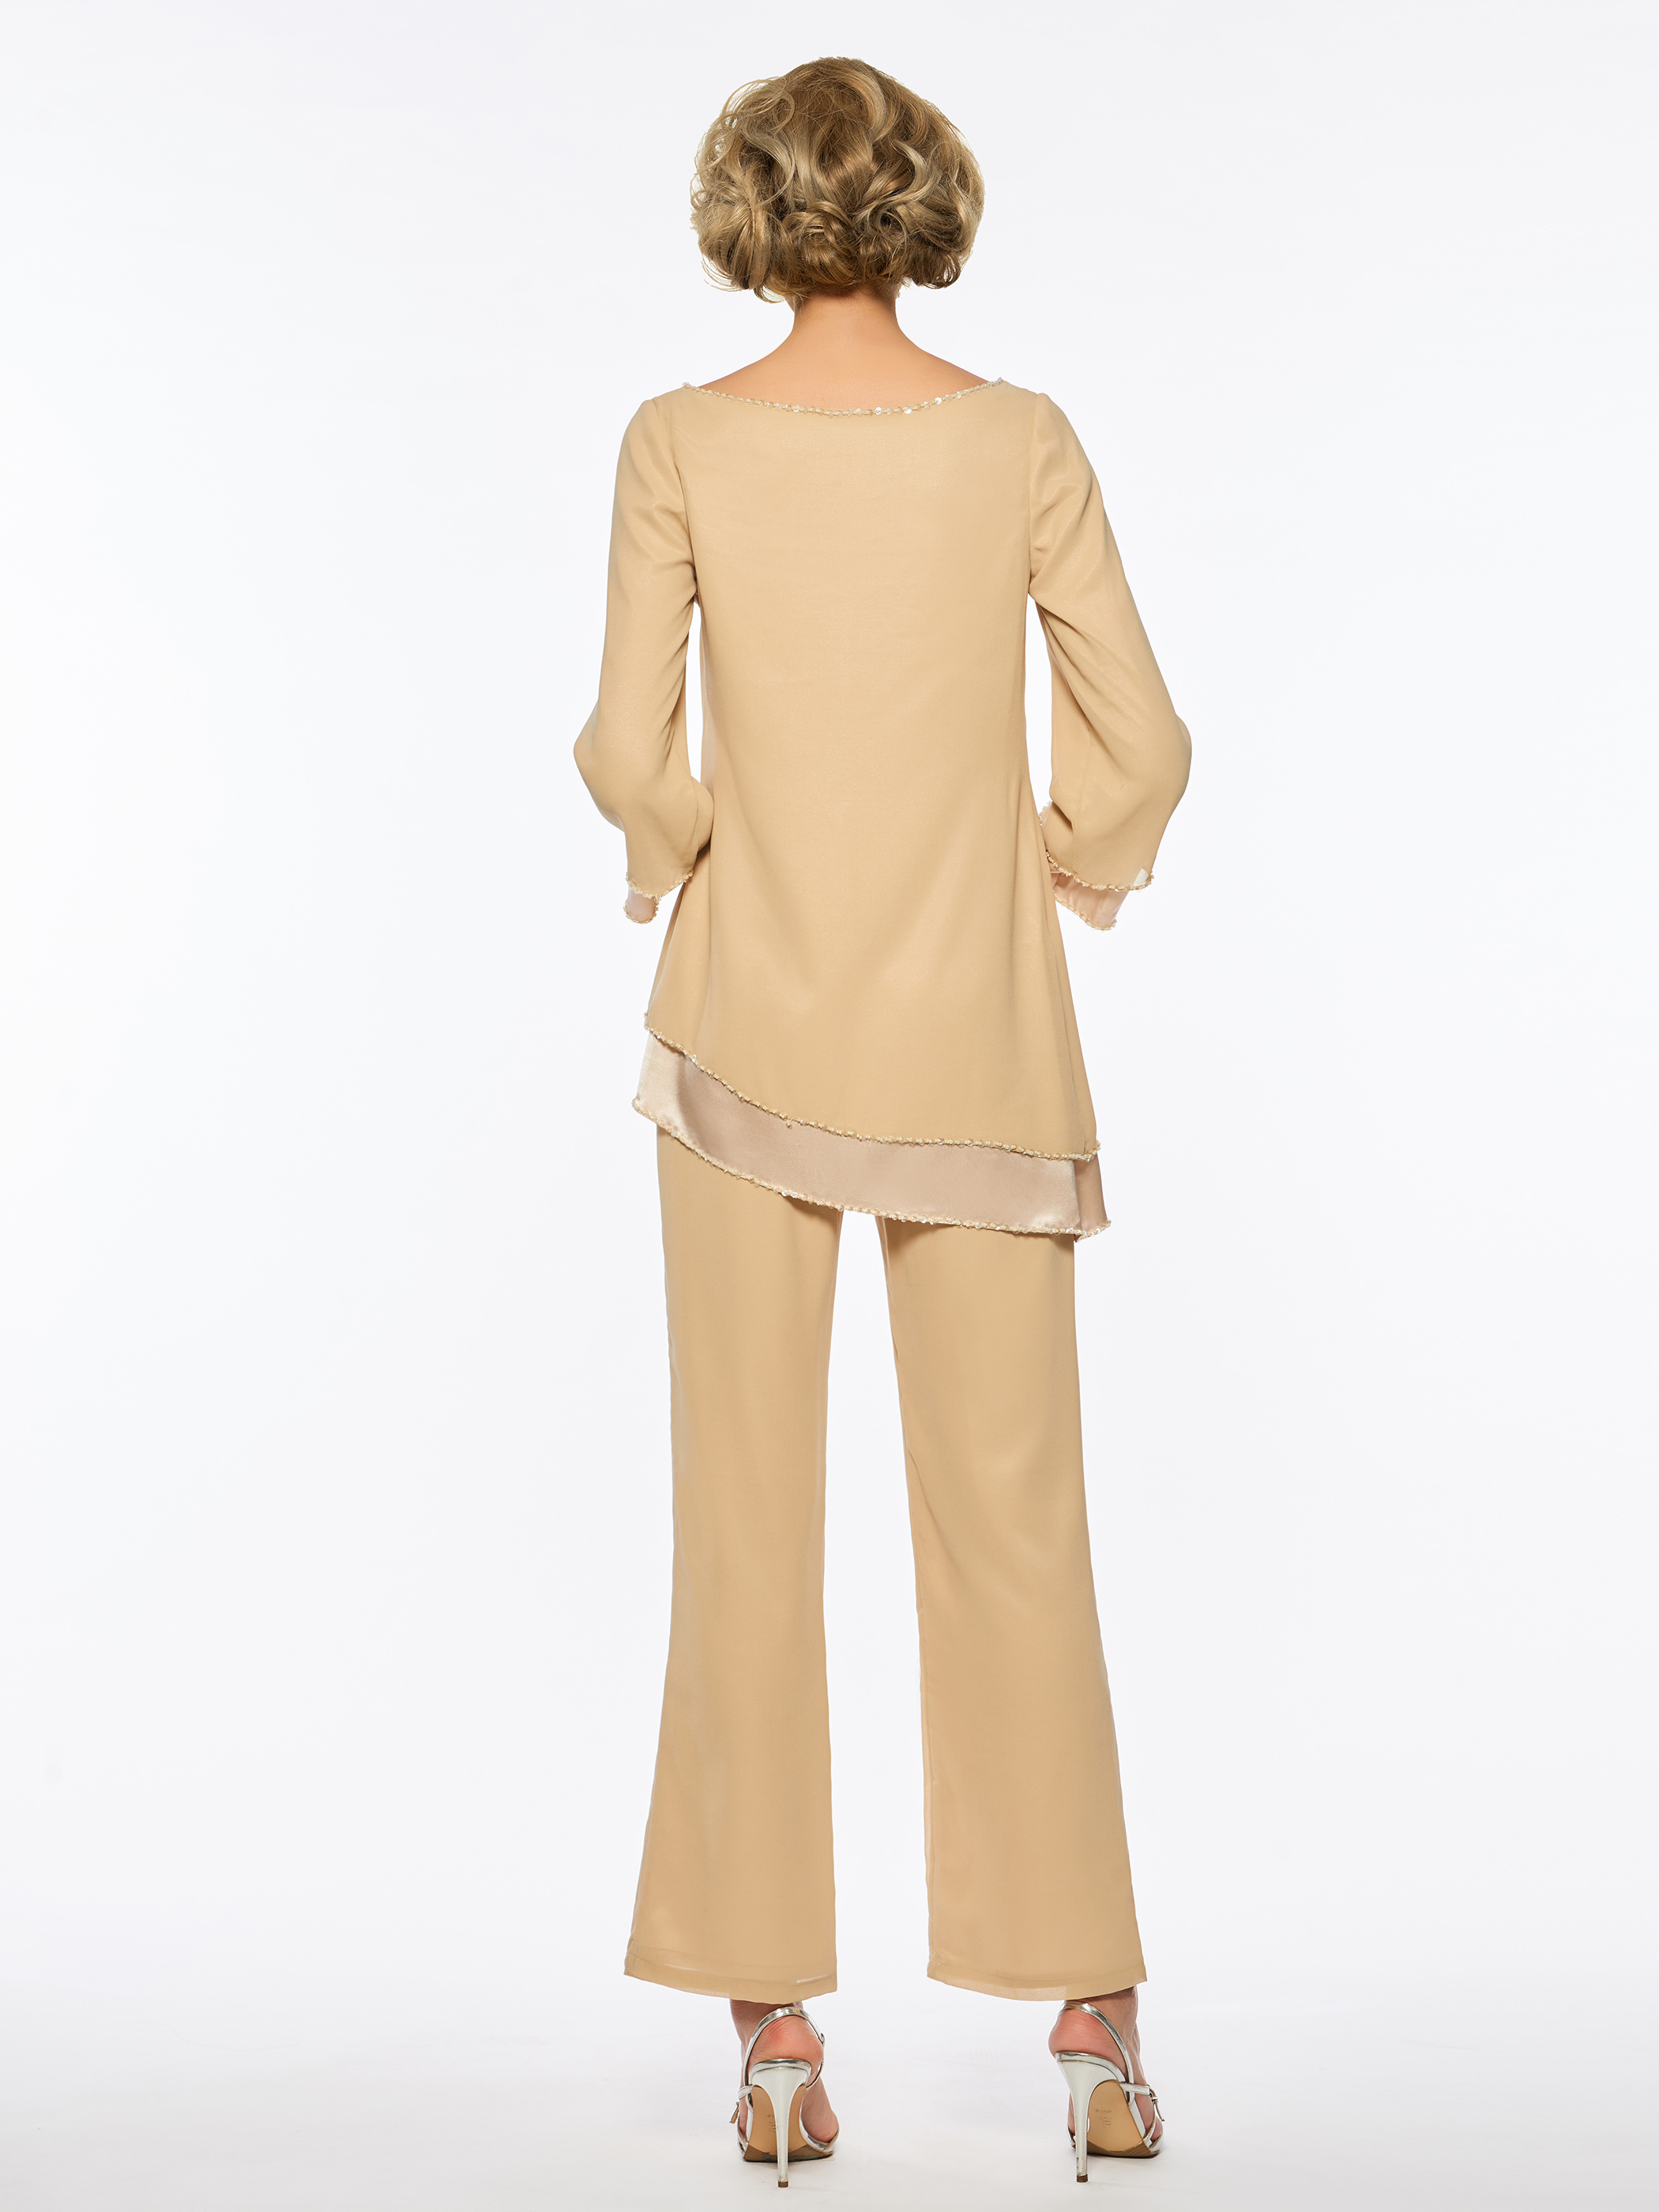 2 Pieces Mother of the Bride Pantsuits with Long Sleeve